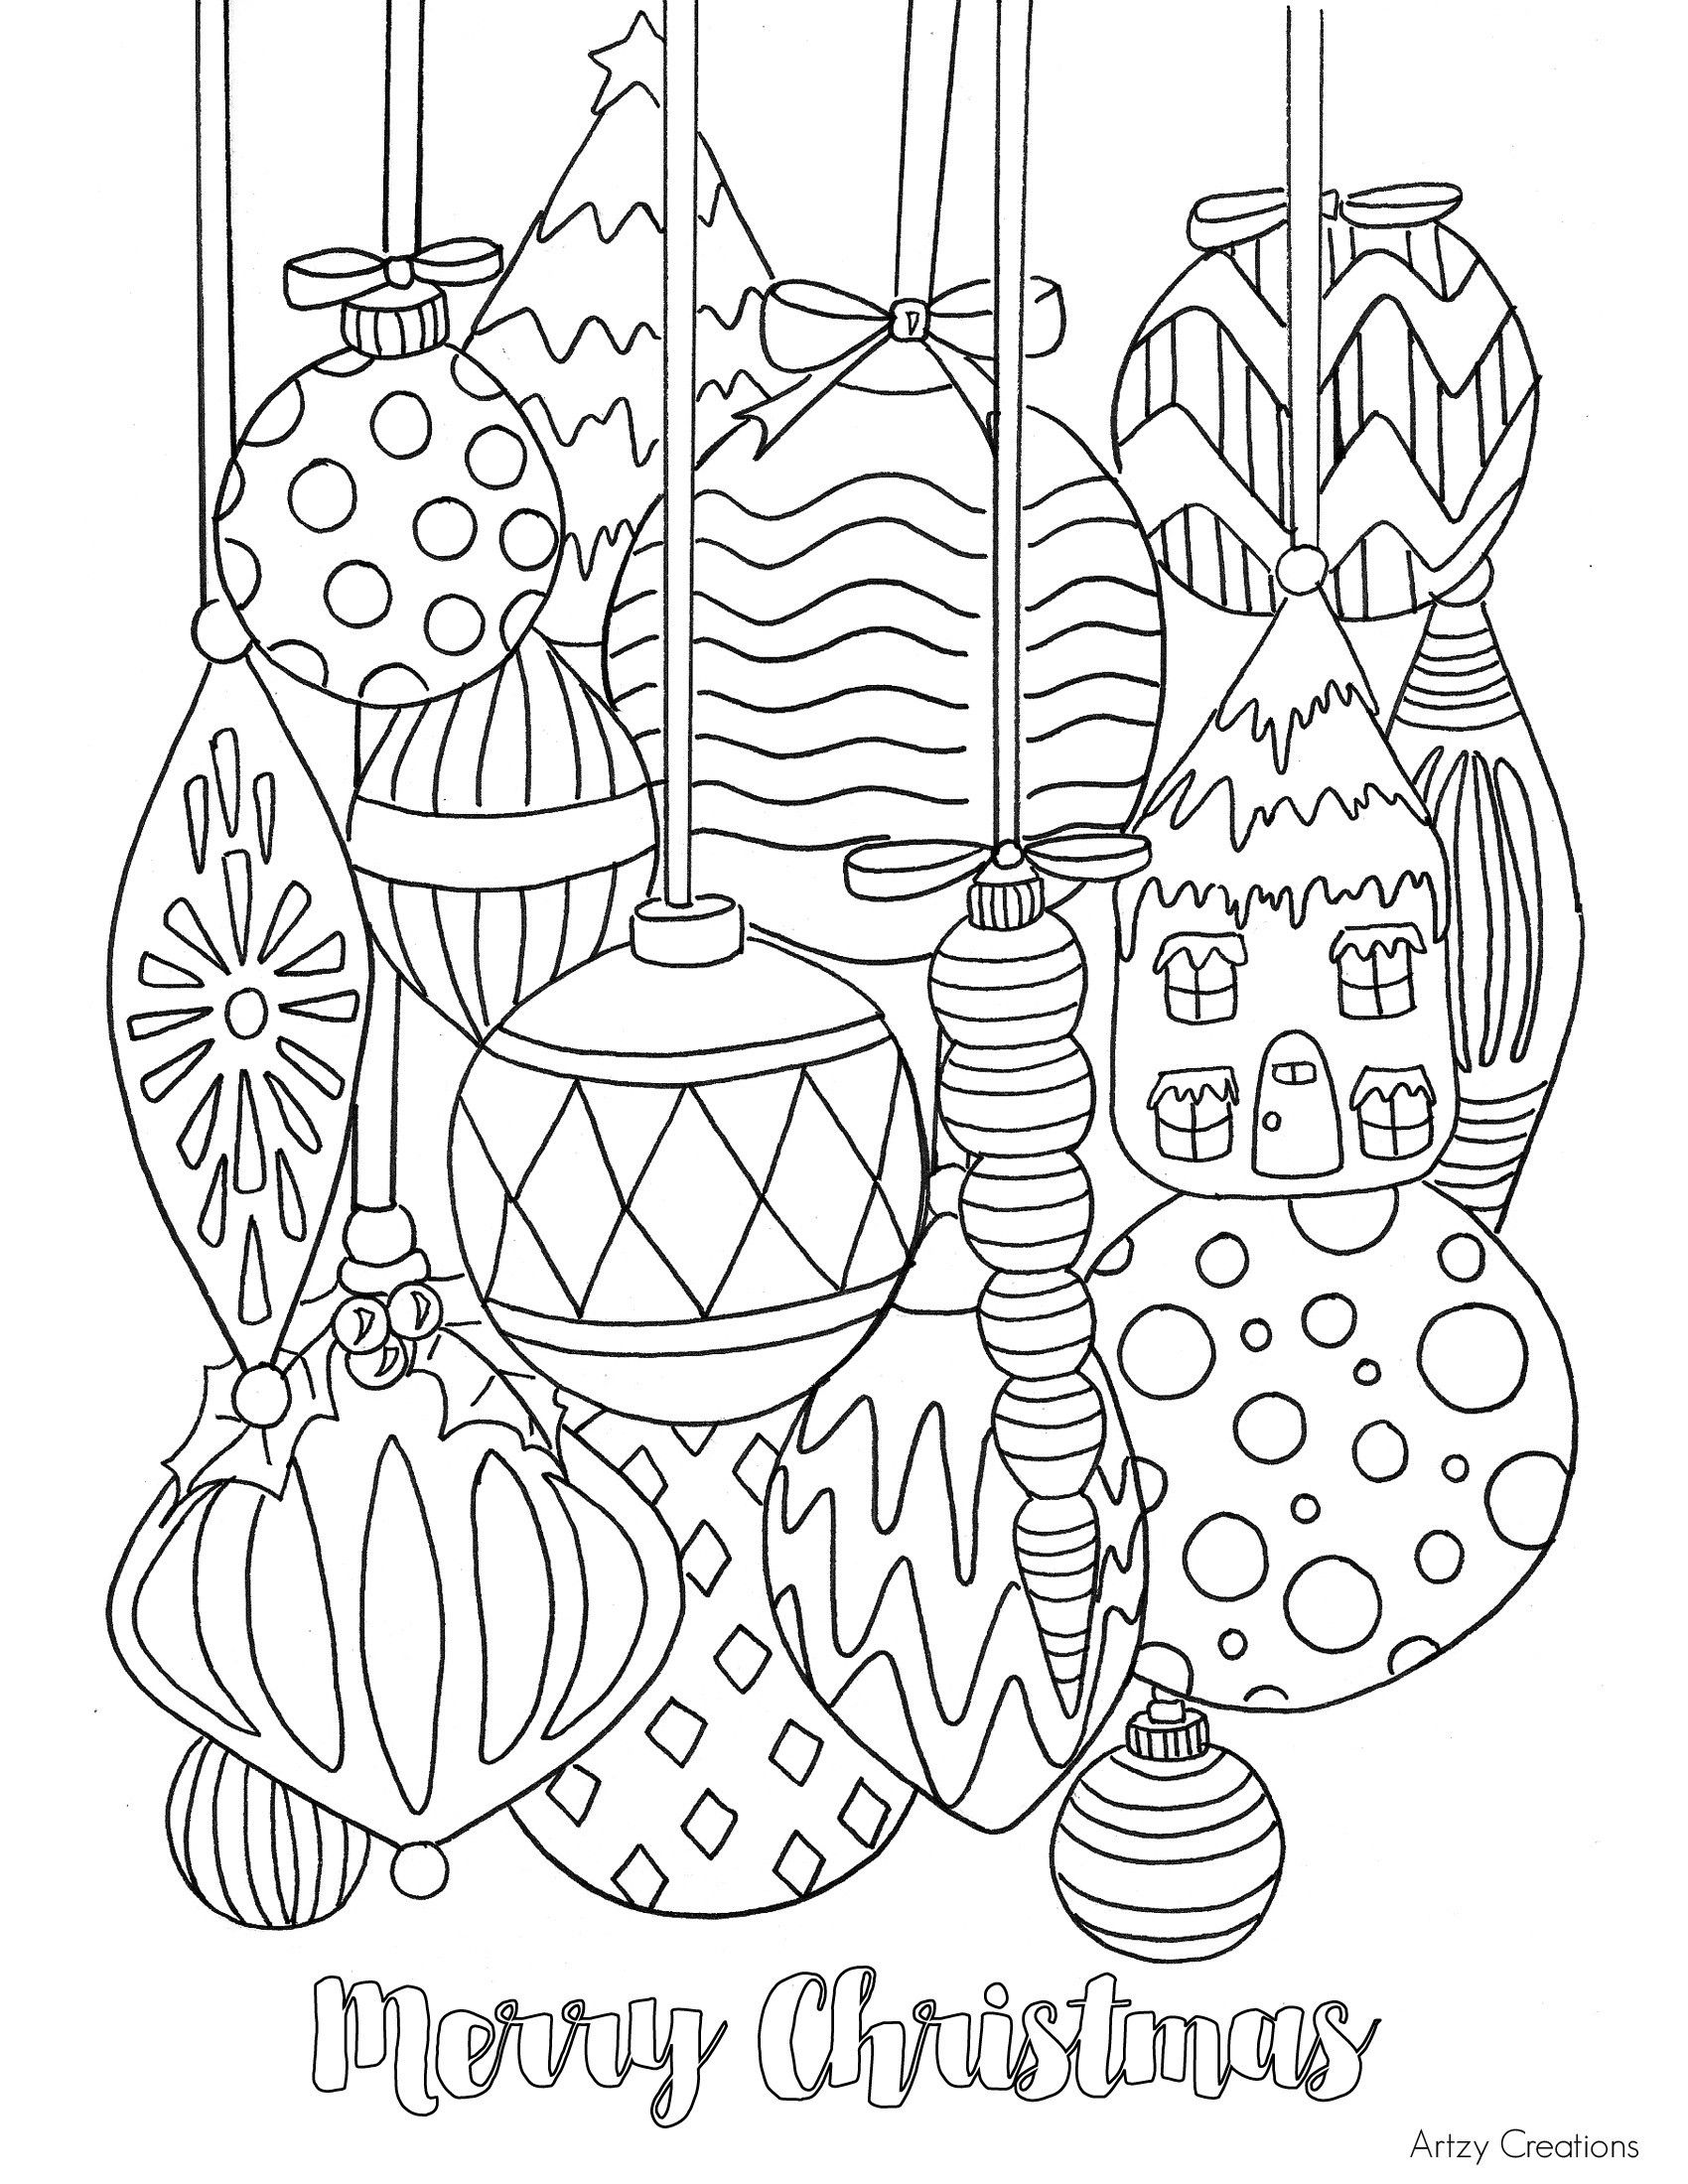 Printable Christmas Coloring Pages For Adults Christmas Coloring Page